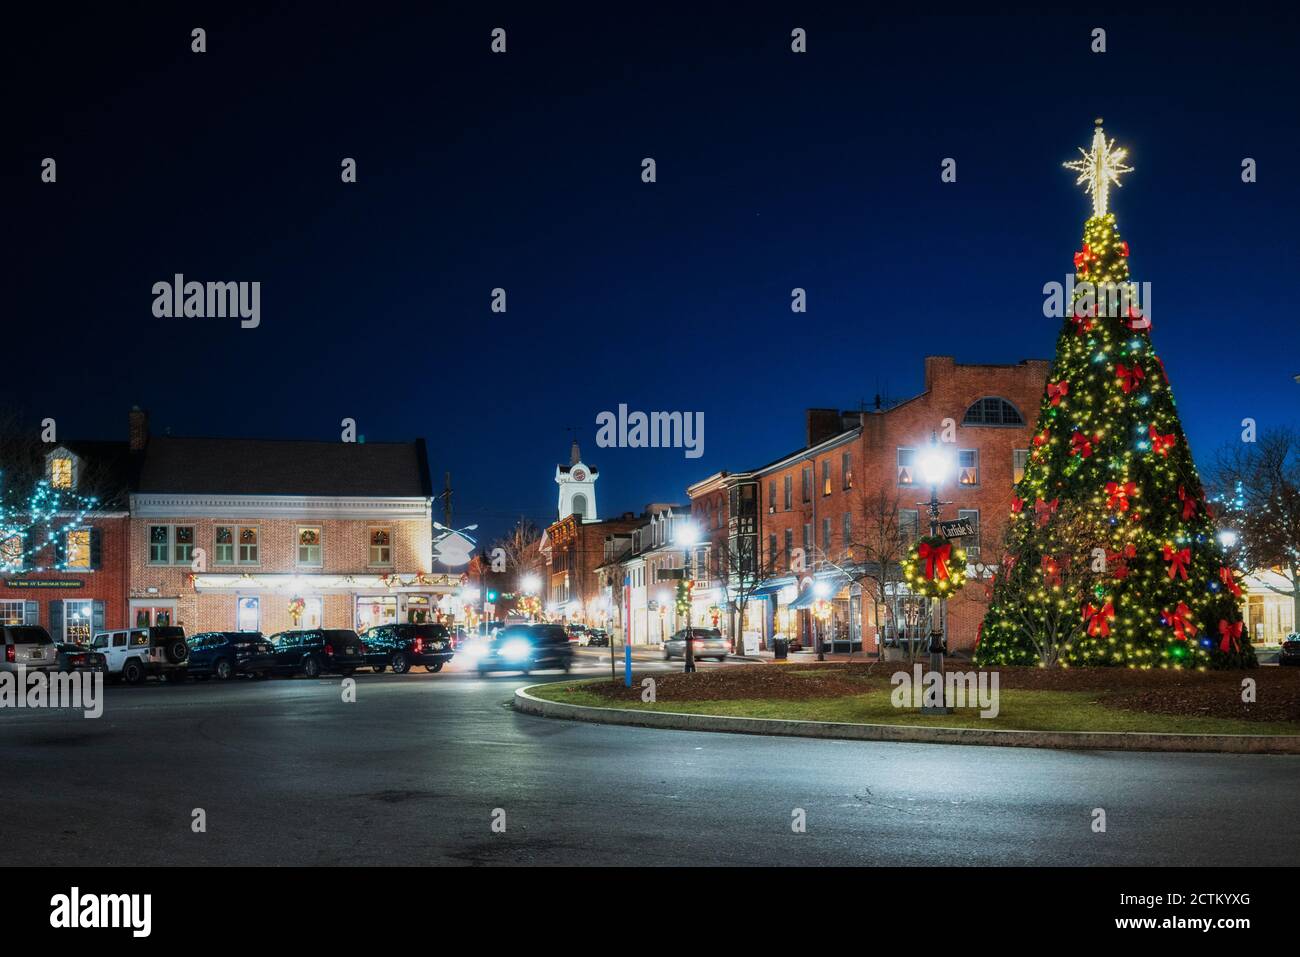 Winter night view of the town square lit up for Christmas, with holiday tree, at night, Gettysburg, Pennsylvania Stock Photo